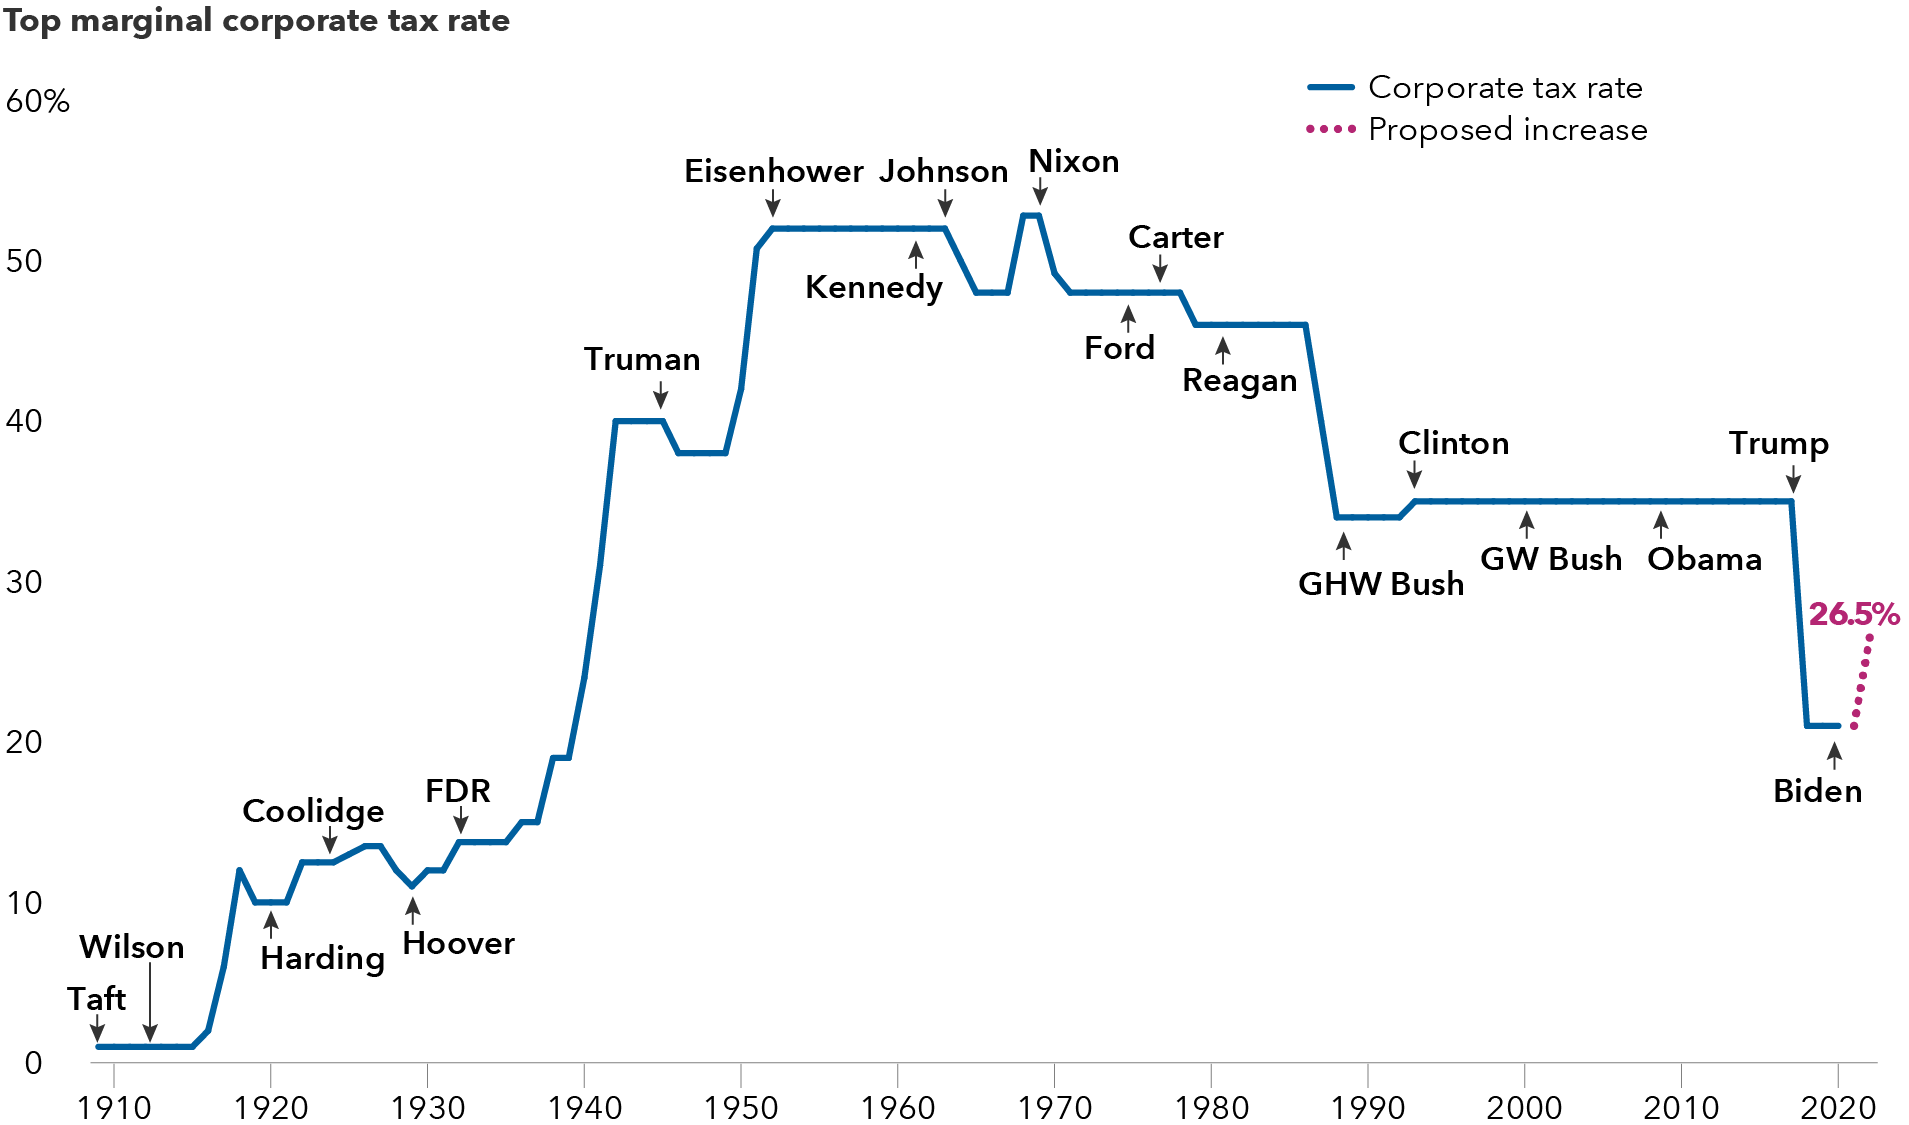 The image shows top marginal corporate tax rates under various U.S. presidential administrations from 1910 to 2021, along with a proposed corporate tax increase to 26.5% currently under consideration in Congress. Sources: Capital Group, Strategas. As of September 23, 2021.